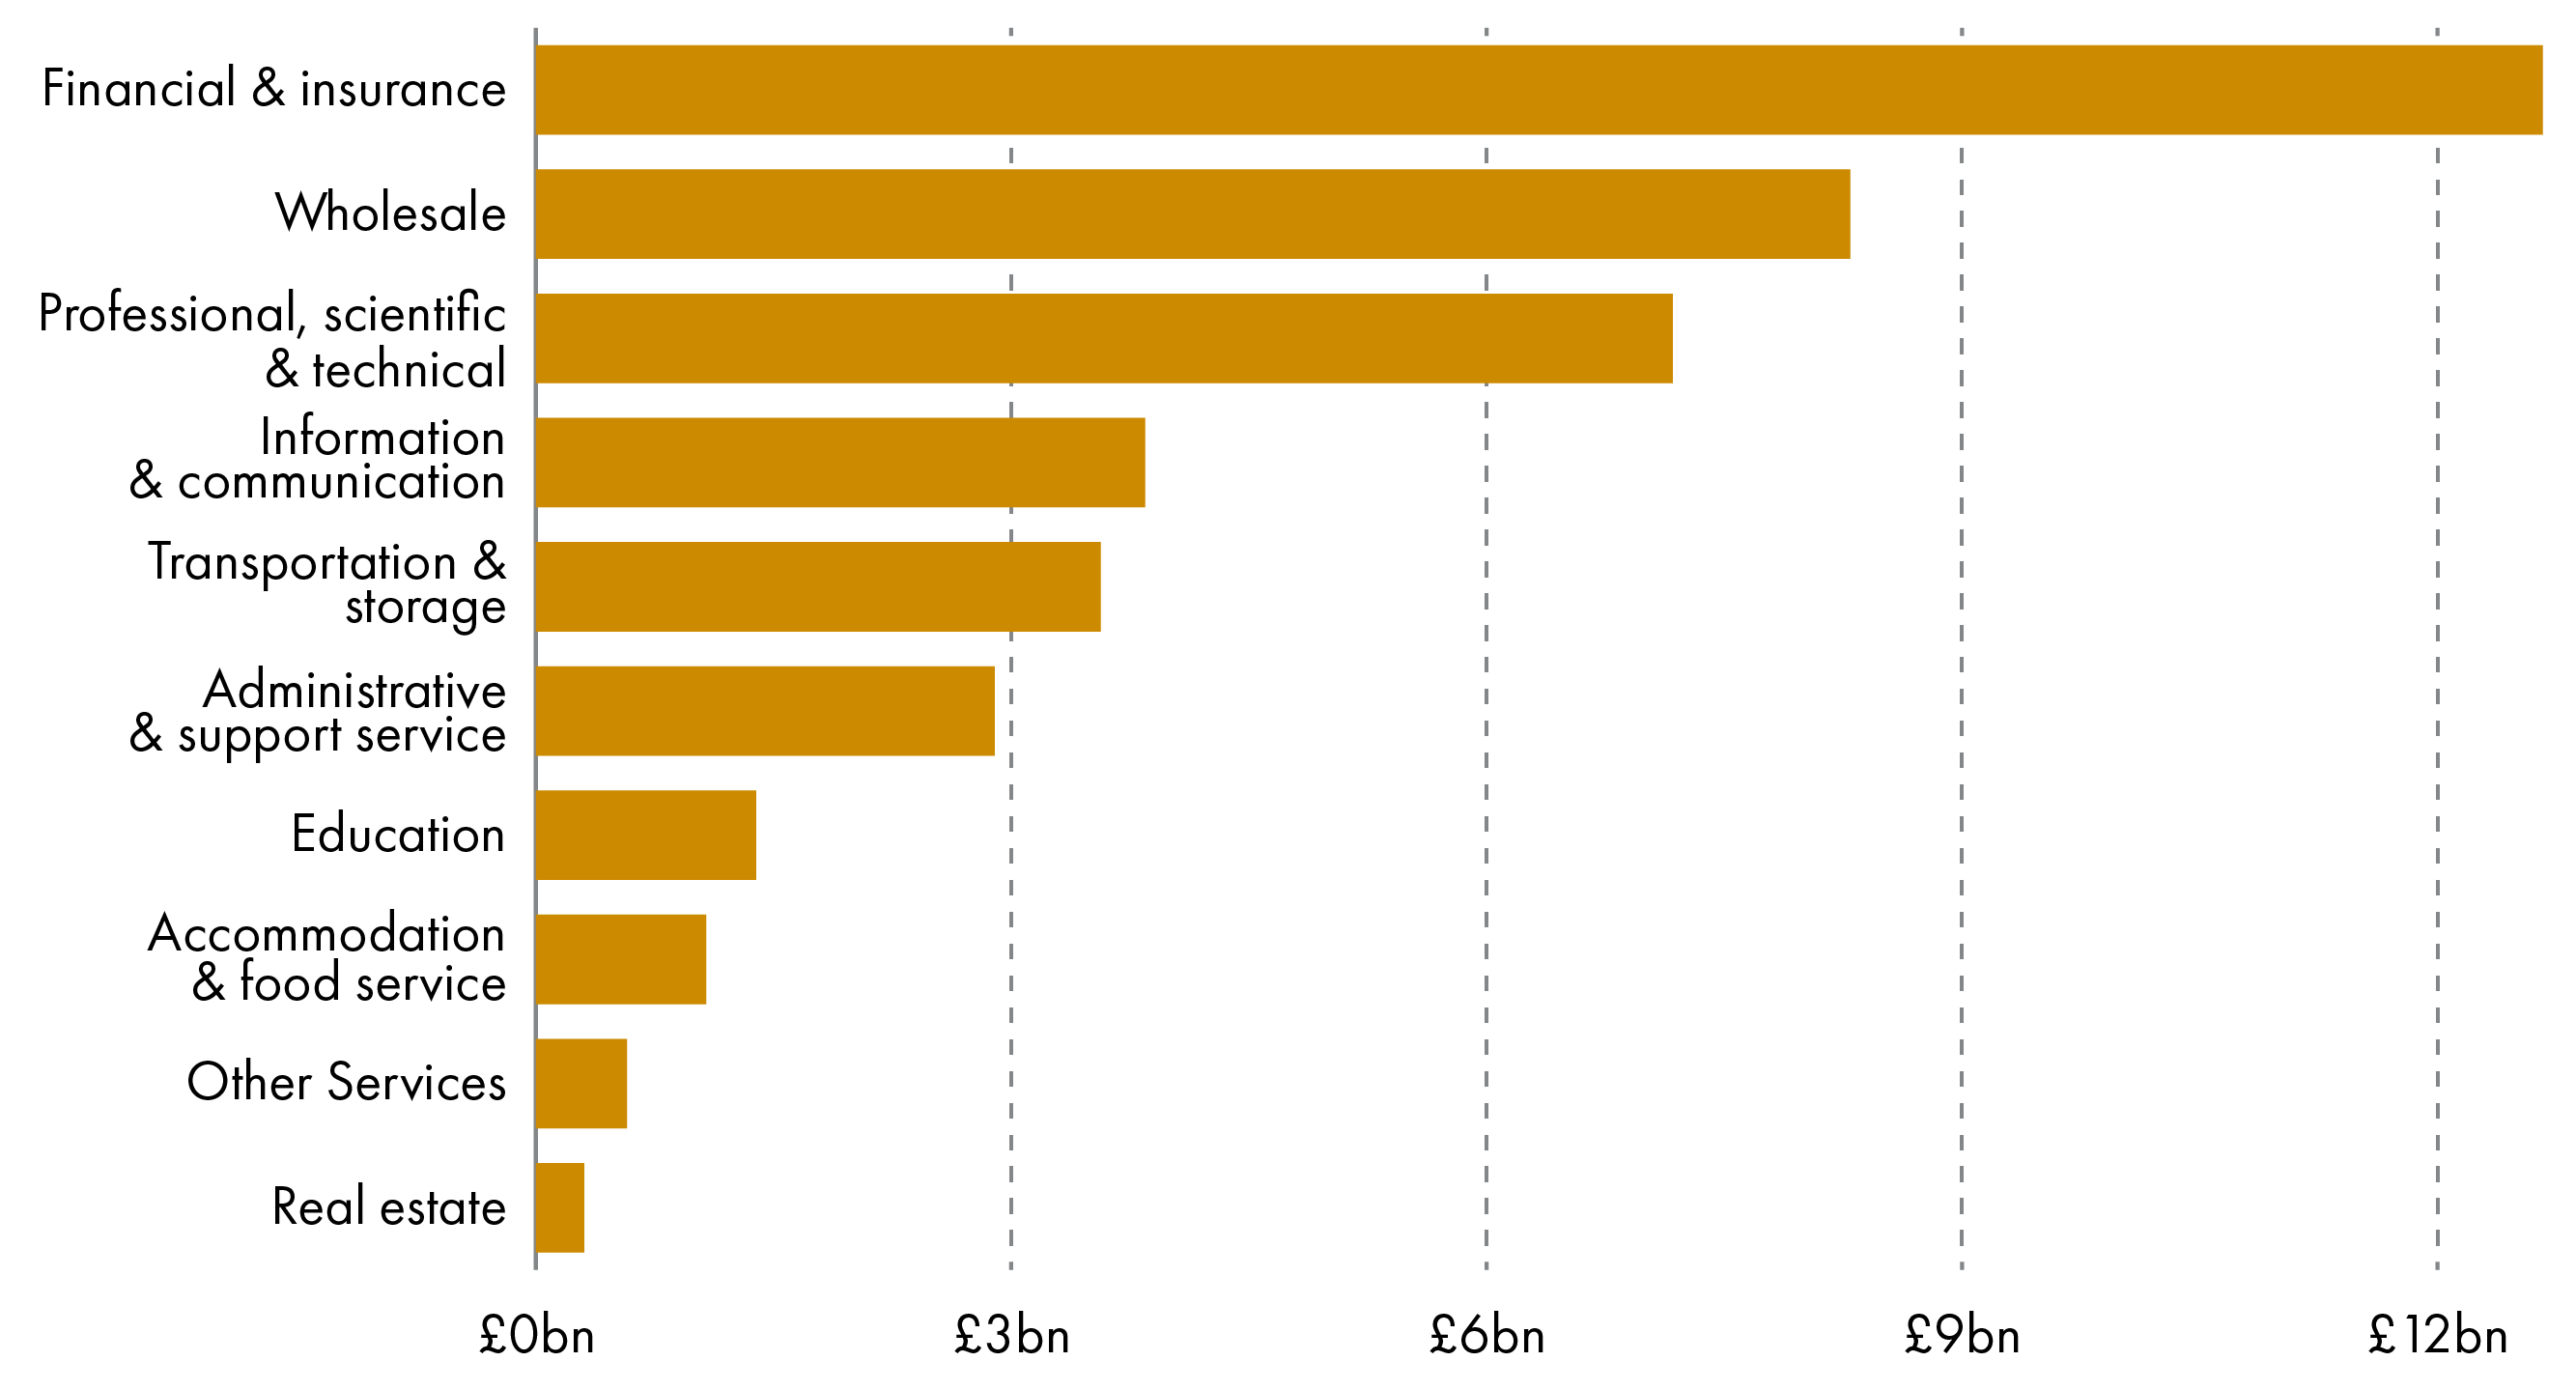 Financial and insurance services was the most valuable services sub-sectors for exports in 2018 at £12.7 billion.